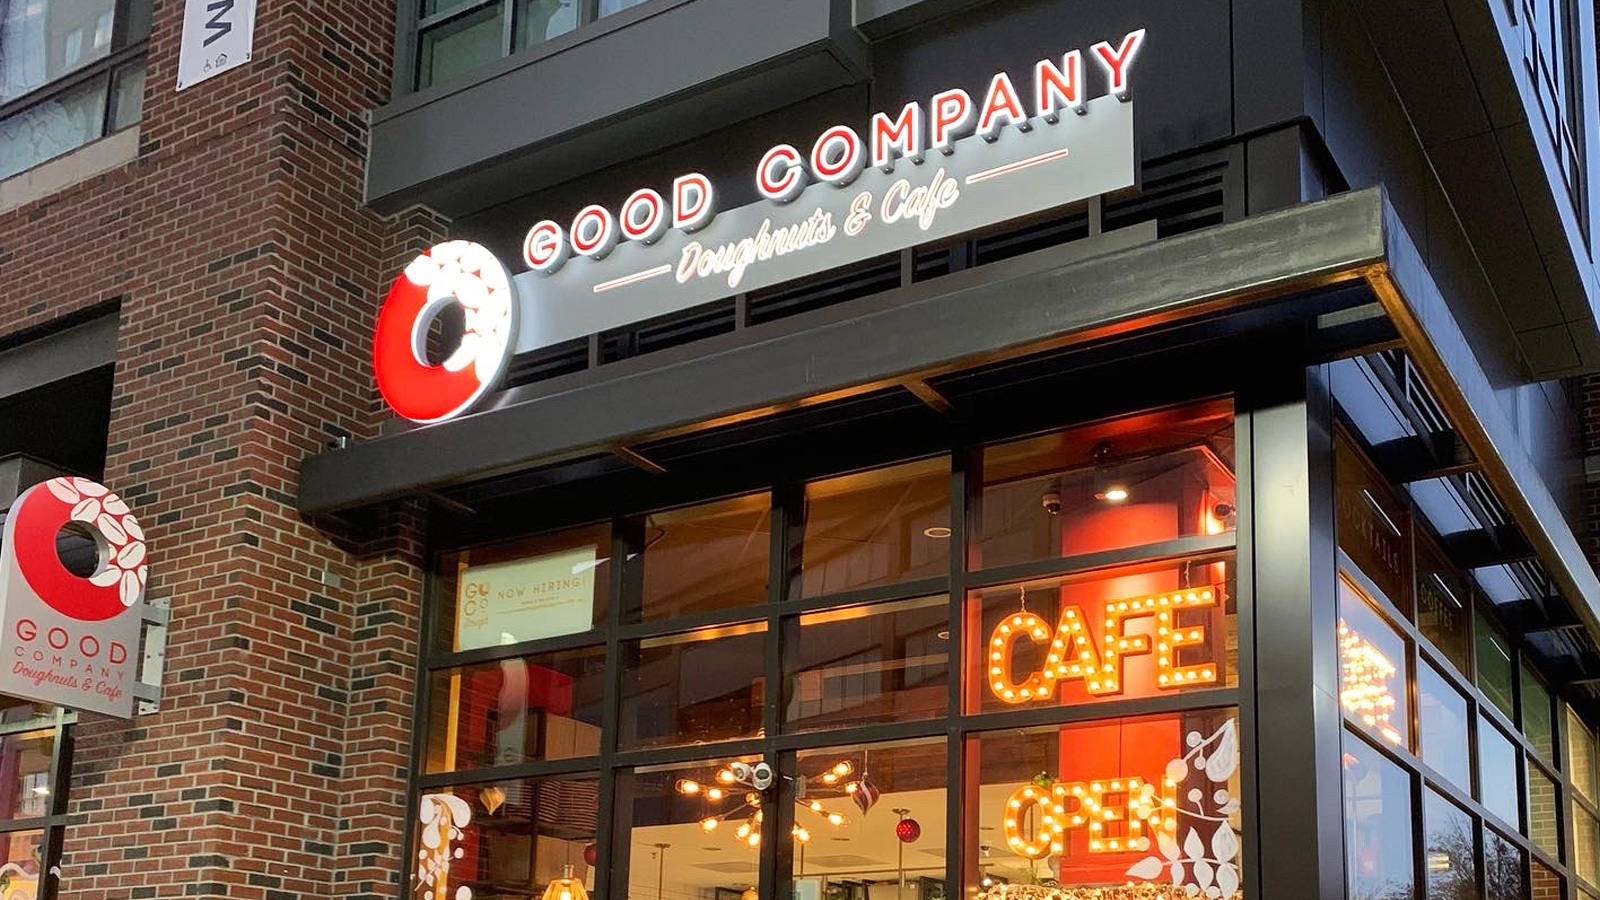 An image of the storefront for Good Company Doughnuts.